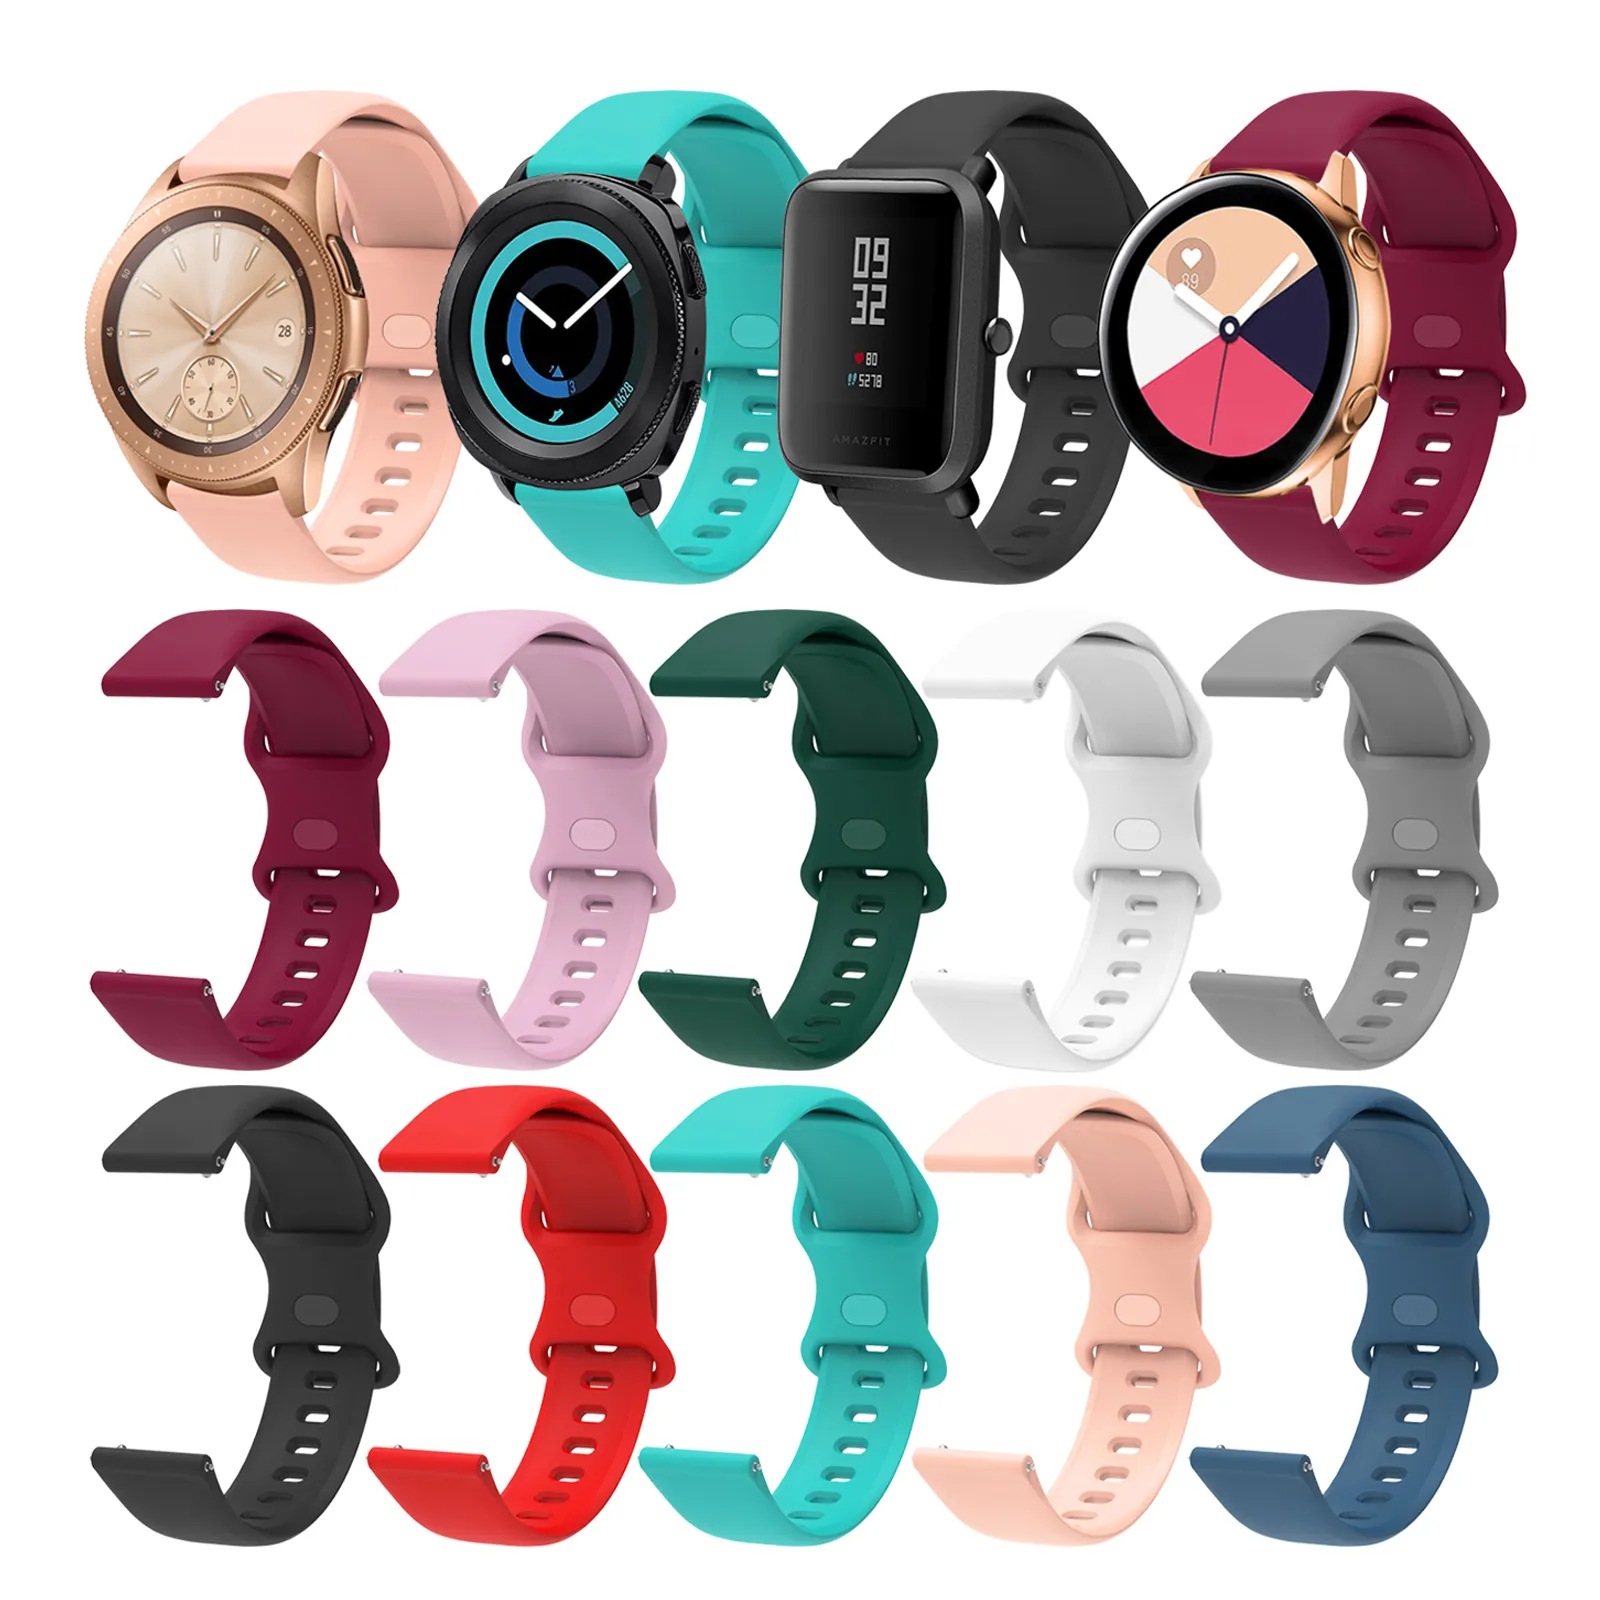 22mm 20 band for samsung Gear sport s3 s2 strap classic Frontier galaxy watch 46mm 42mm rubber huami amazfit bip huawei gt 2 silicone bands